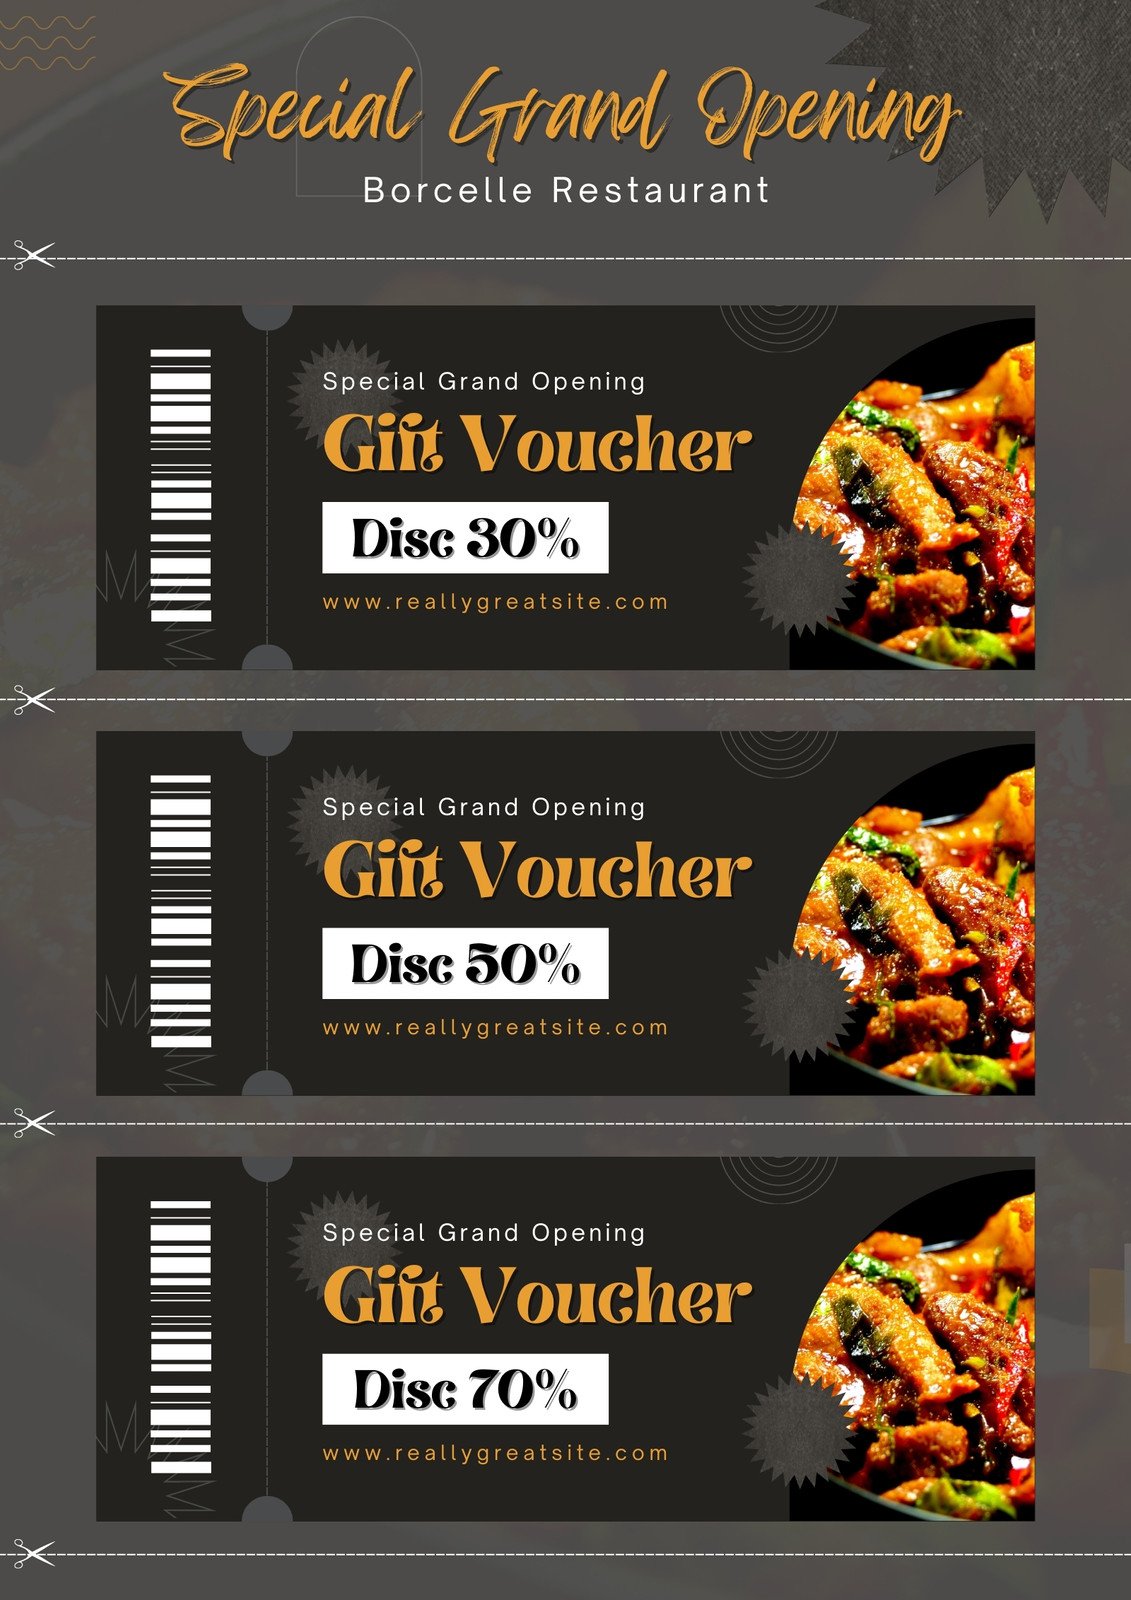 Inexpensive dining vouchers